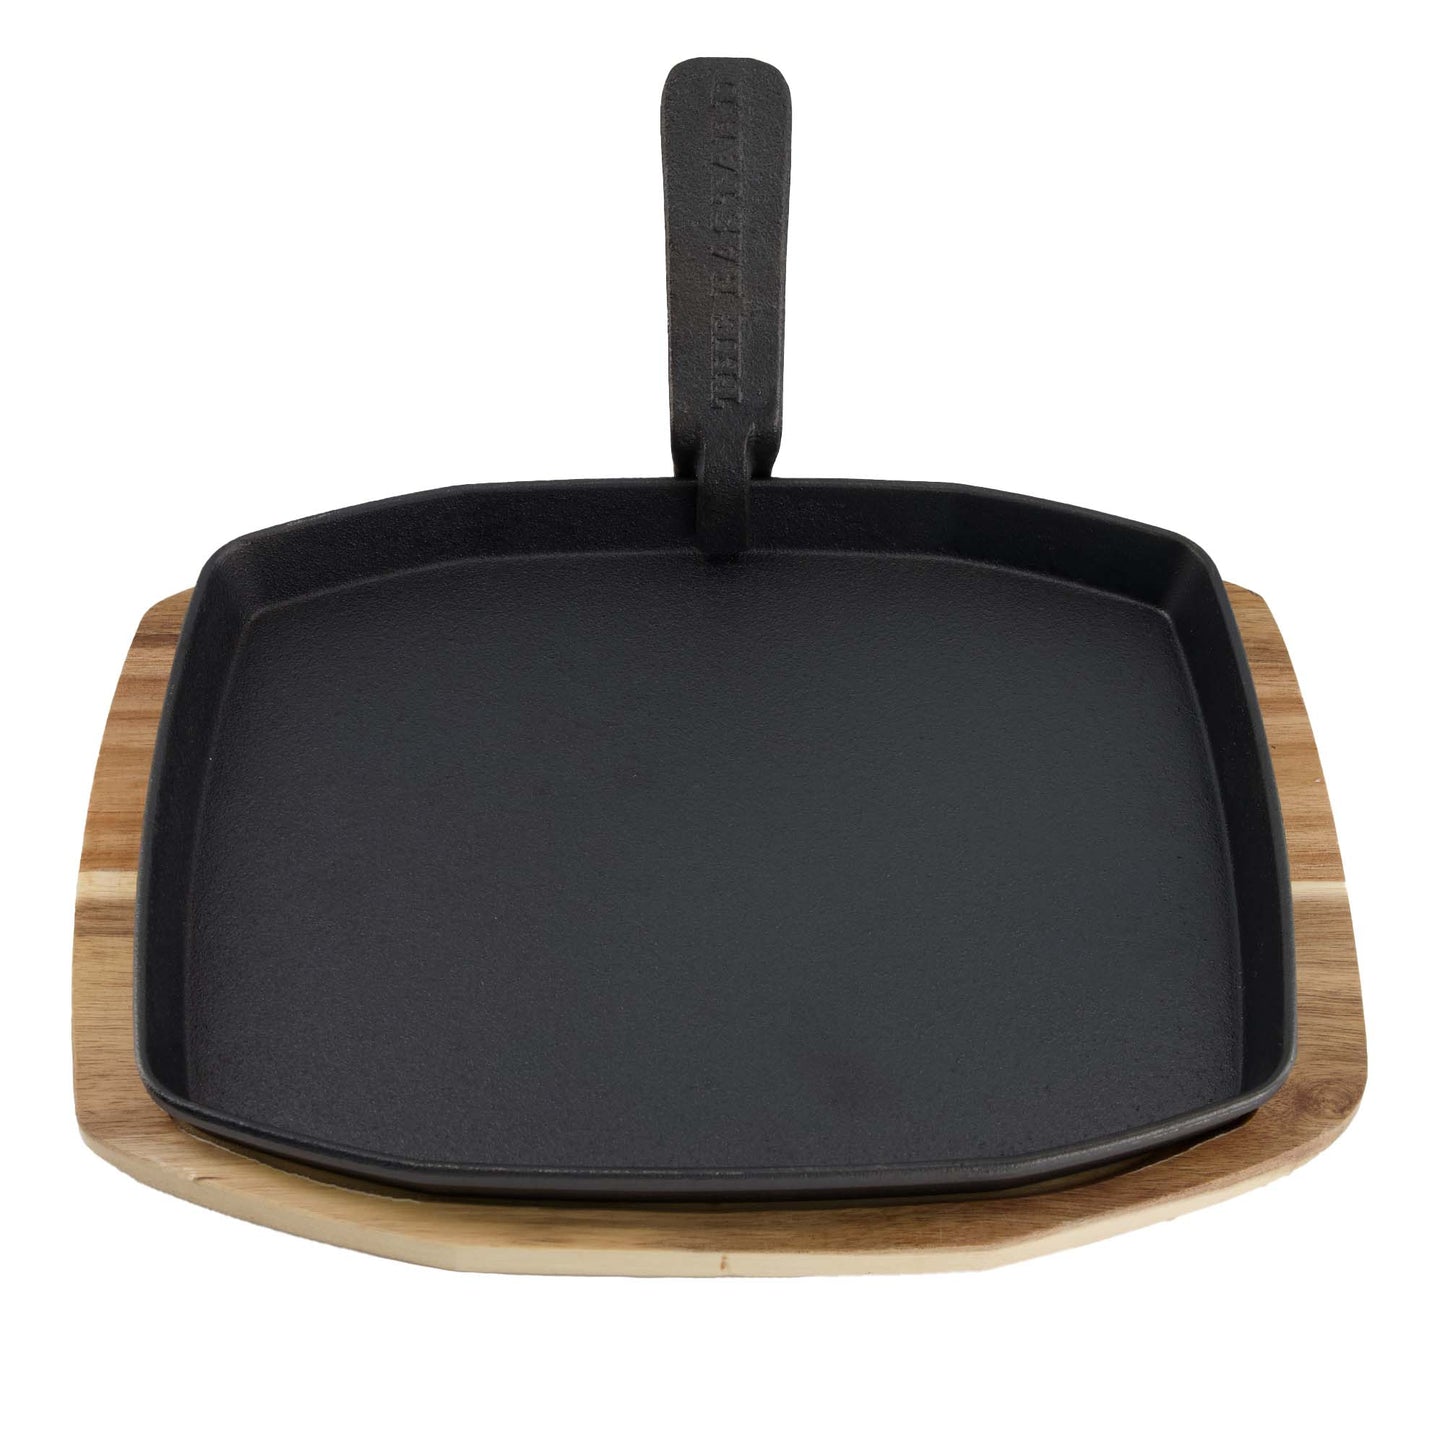 The Bastard Cast Iron Sizzling Plate and Holder - M/C